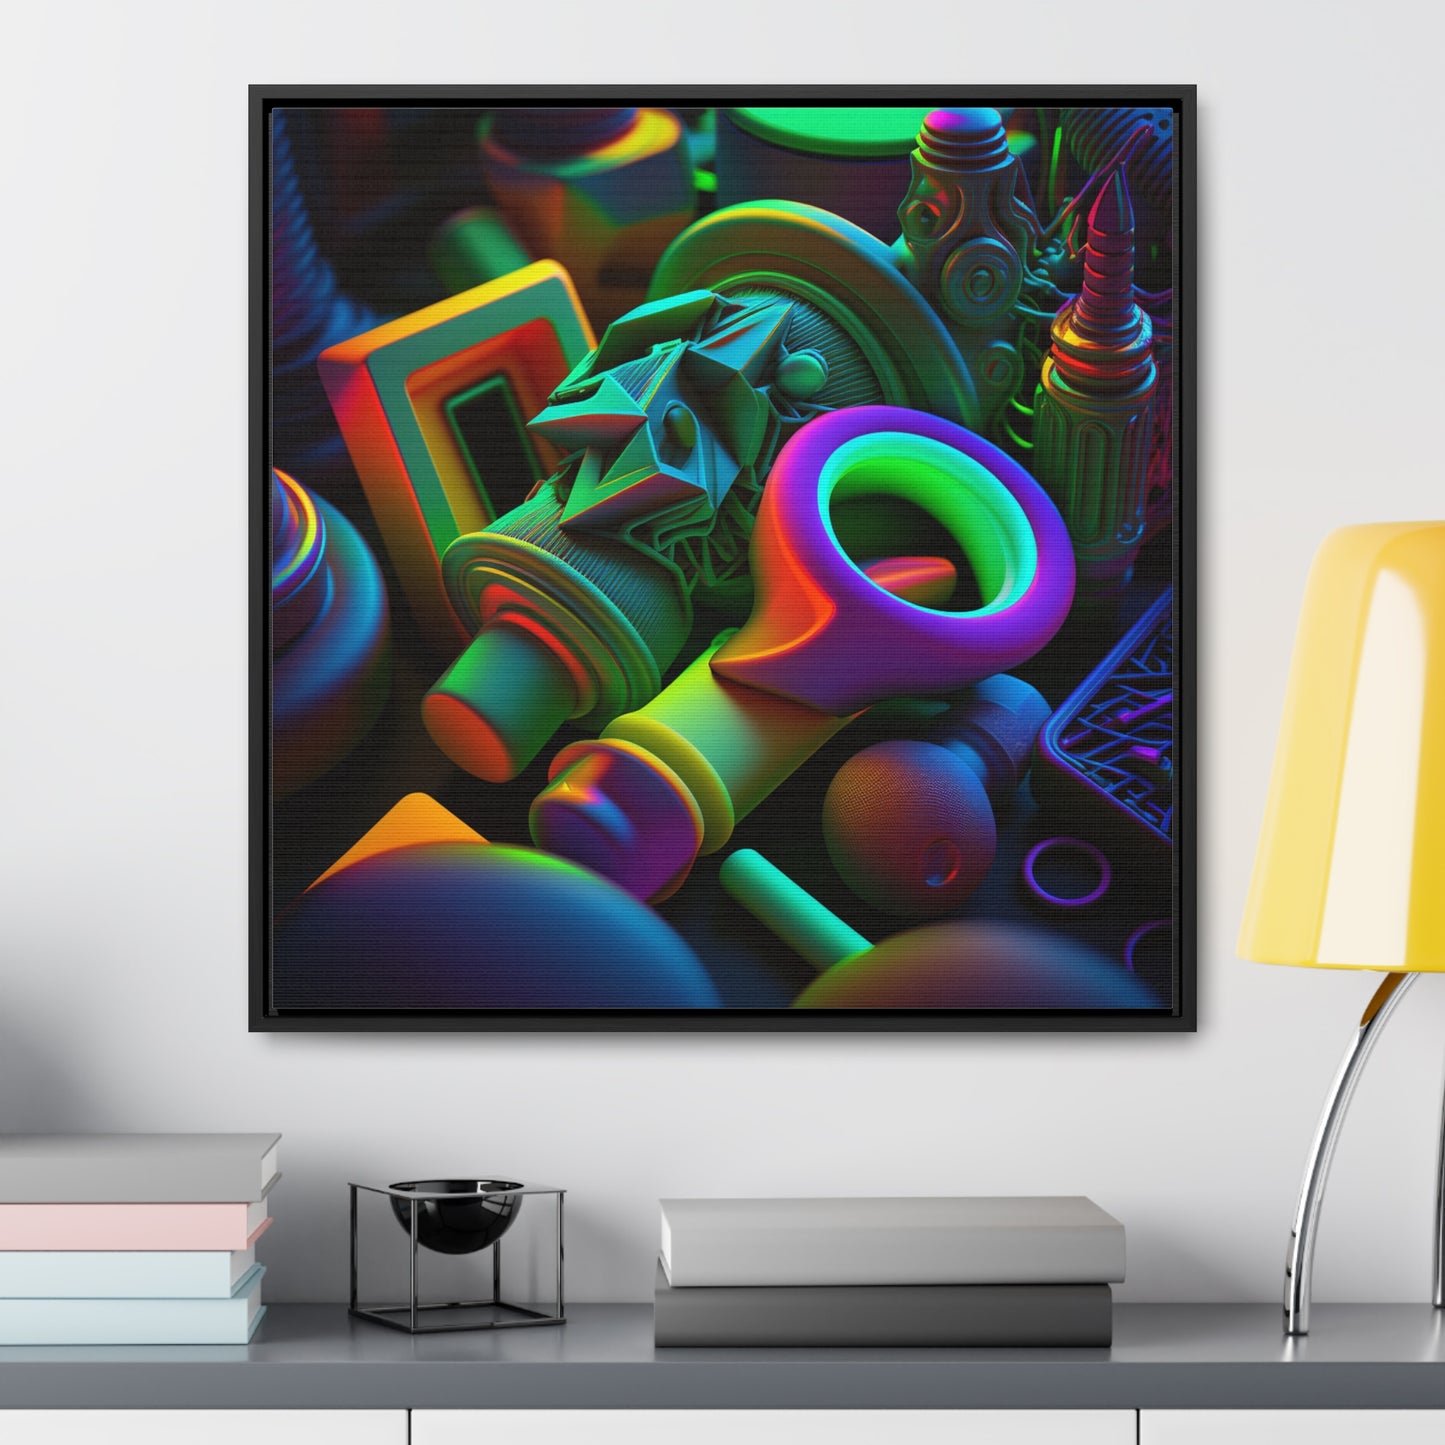 Gallery Canvas Wraps, Square Frame Neon Glow 2